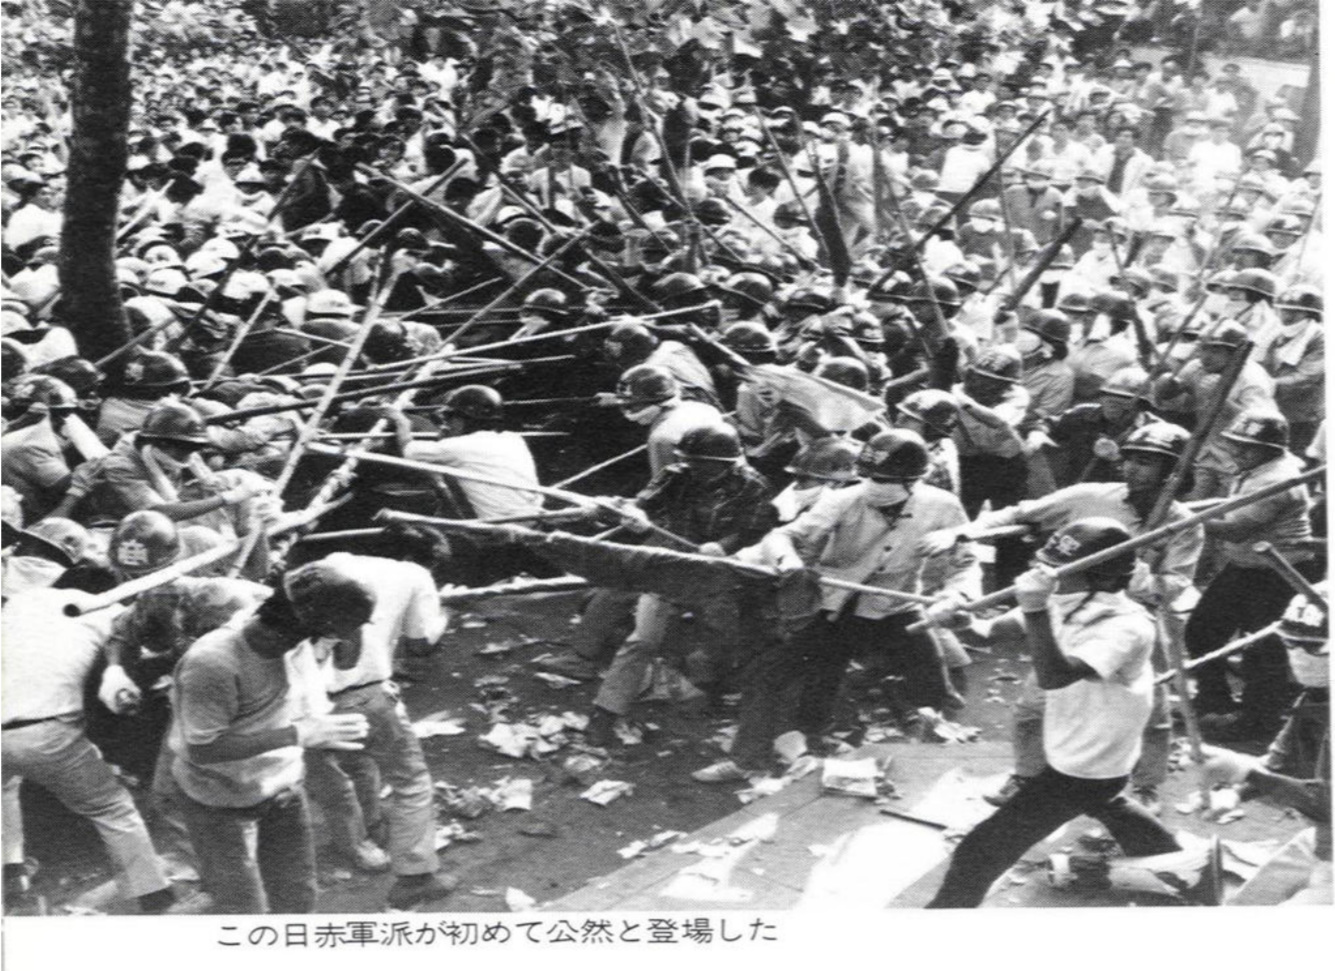 Auckland scramble mere og mere File:Red army faction against the bund.png - Wikimedia Commons